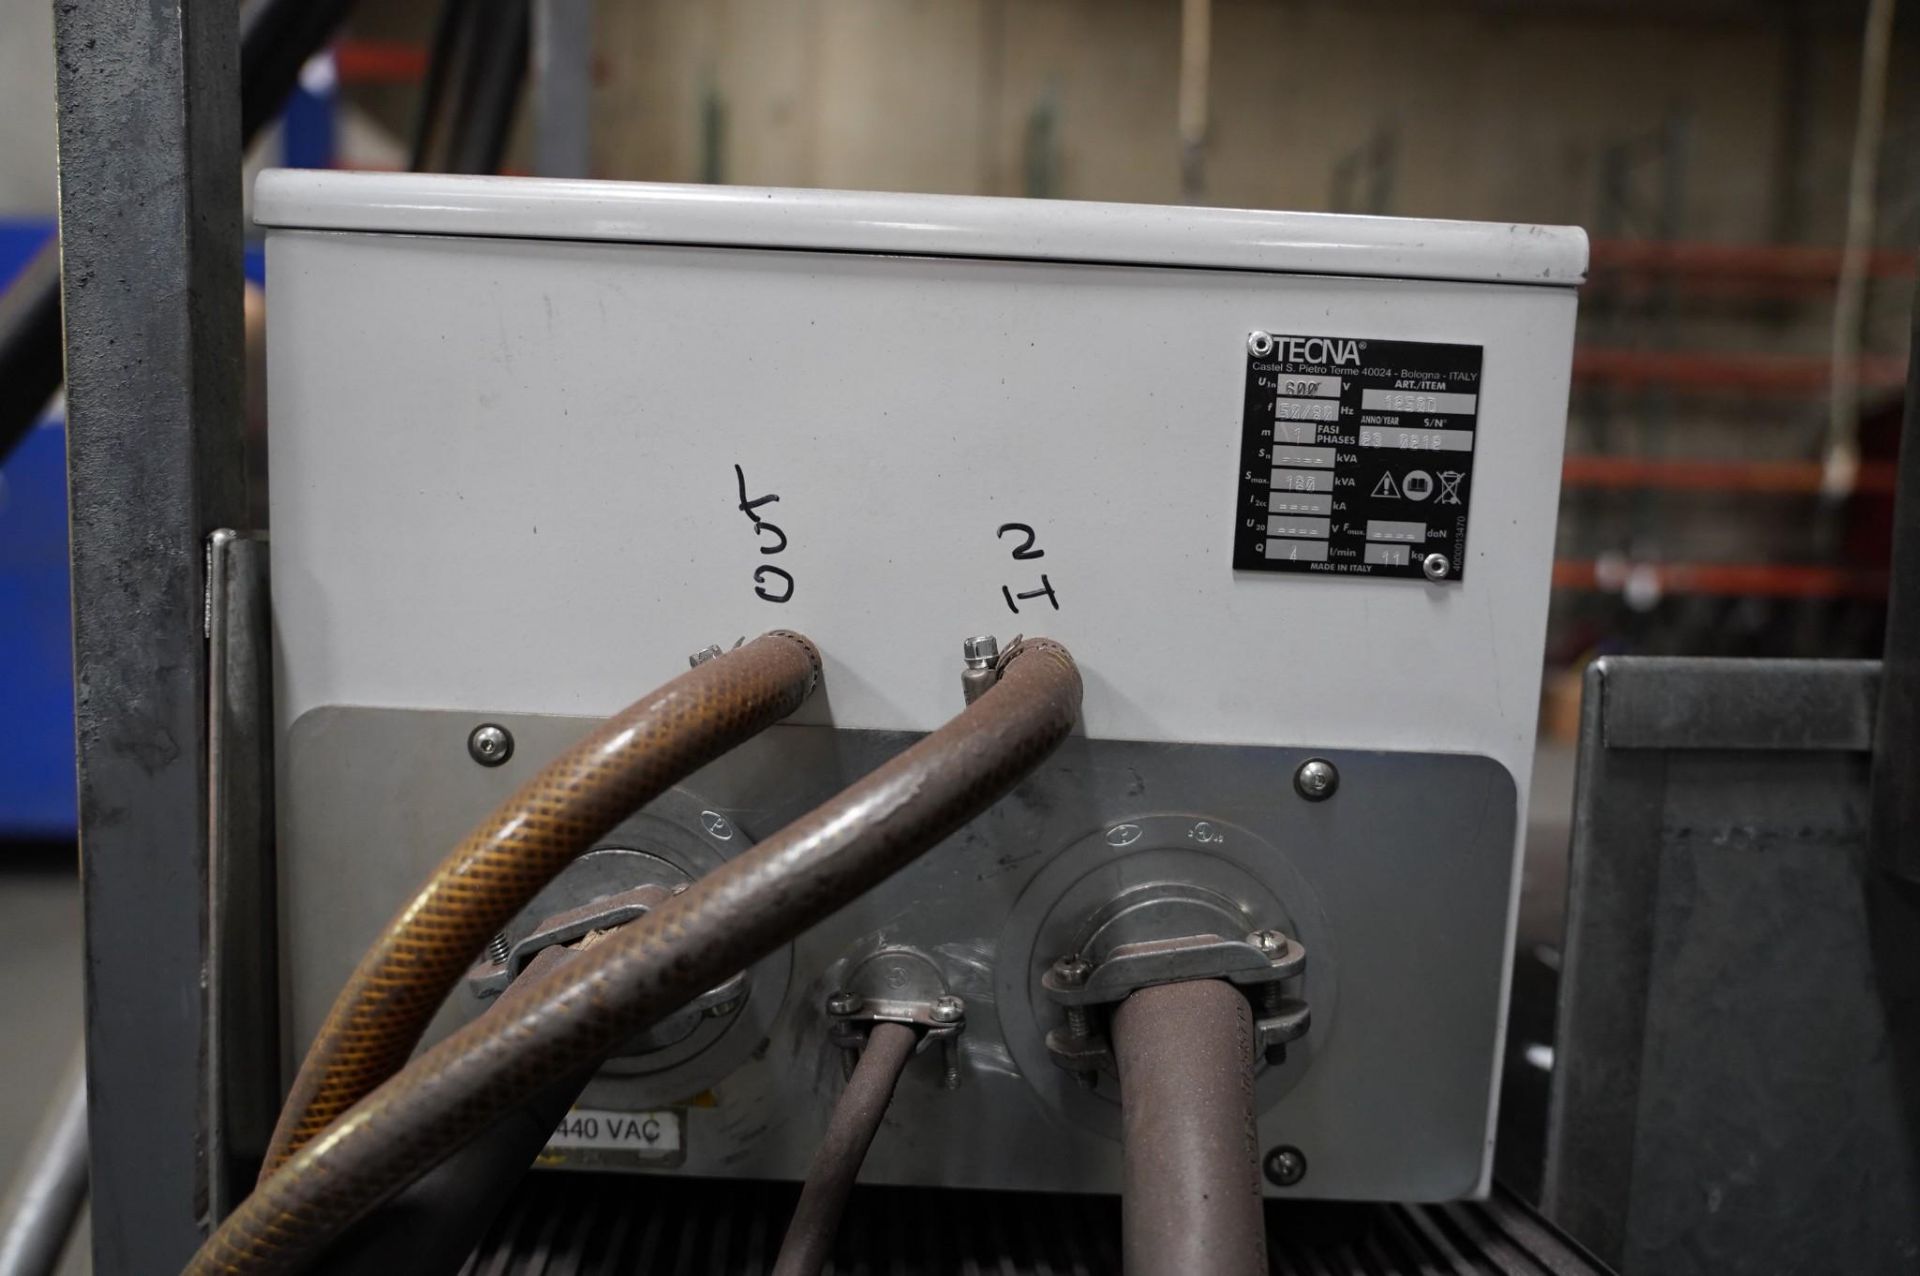 2023 TECNA TE 101 MICROPROCESSOR WELDING CONTROL UNIT WITH SINGLE PHASE RESISTANCE TACK WELDER - Image 3 of 9